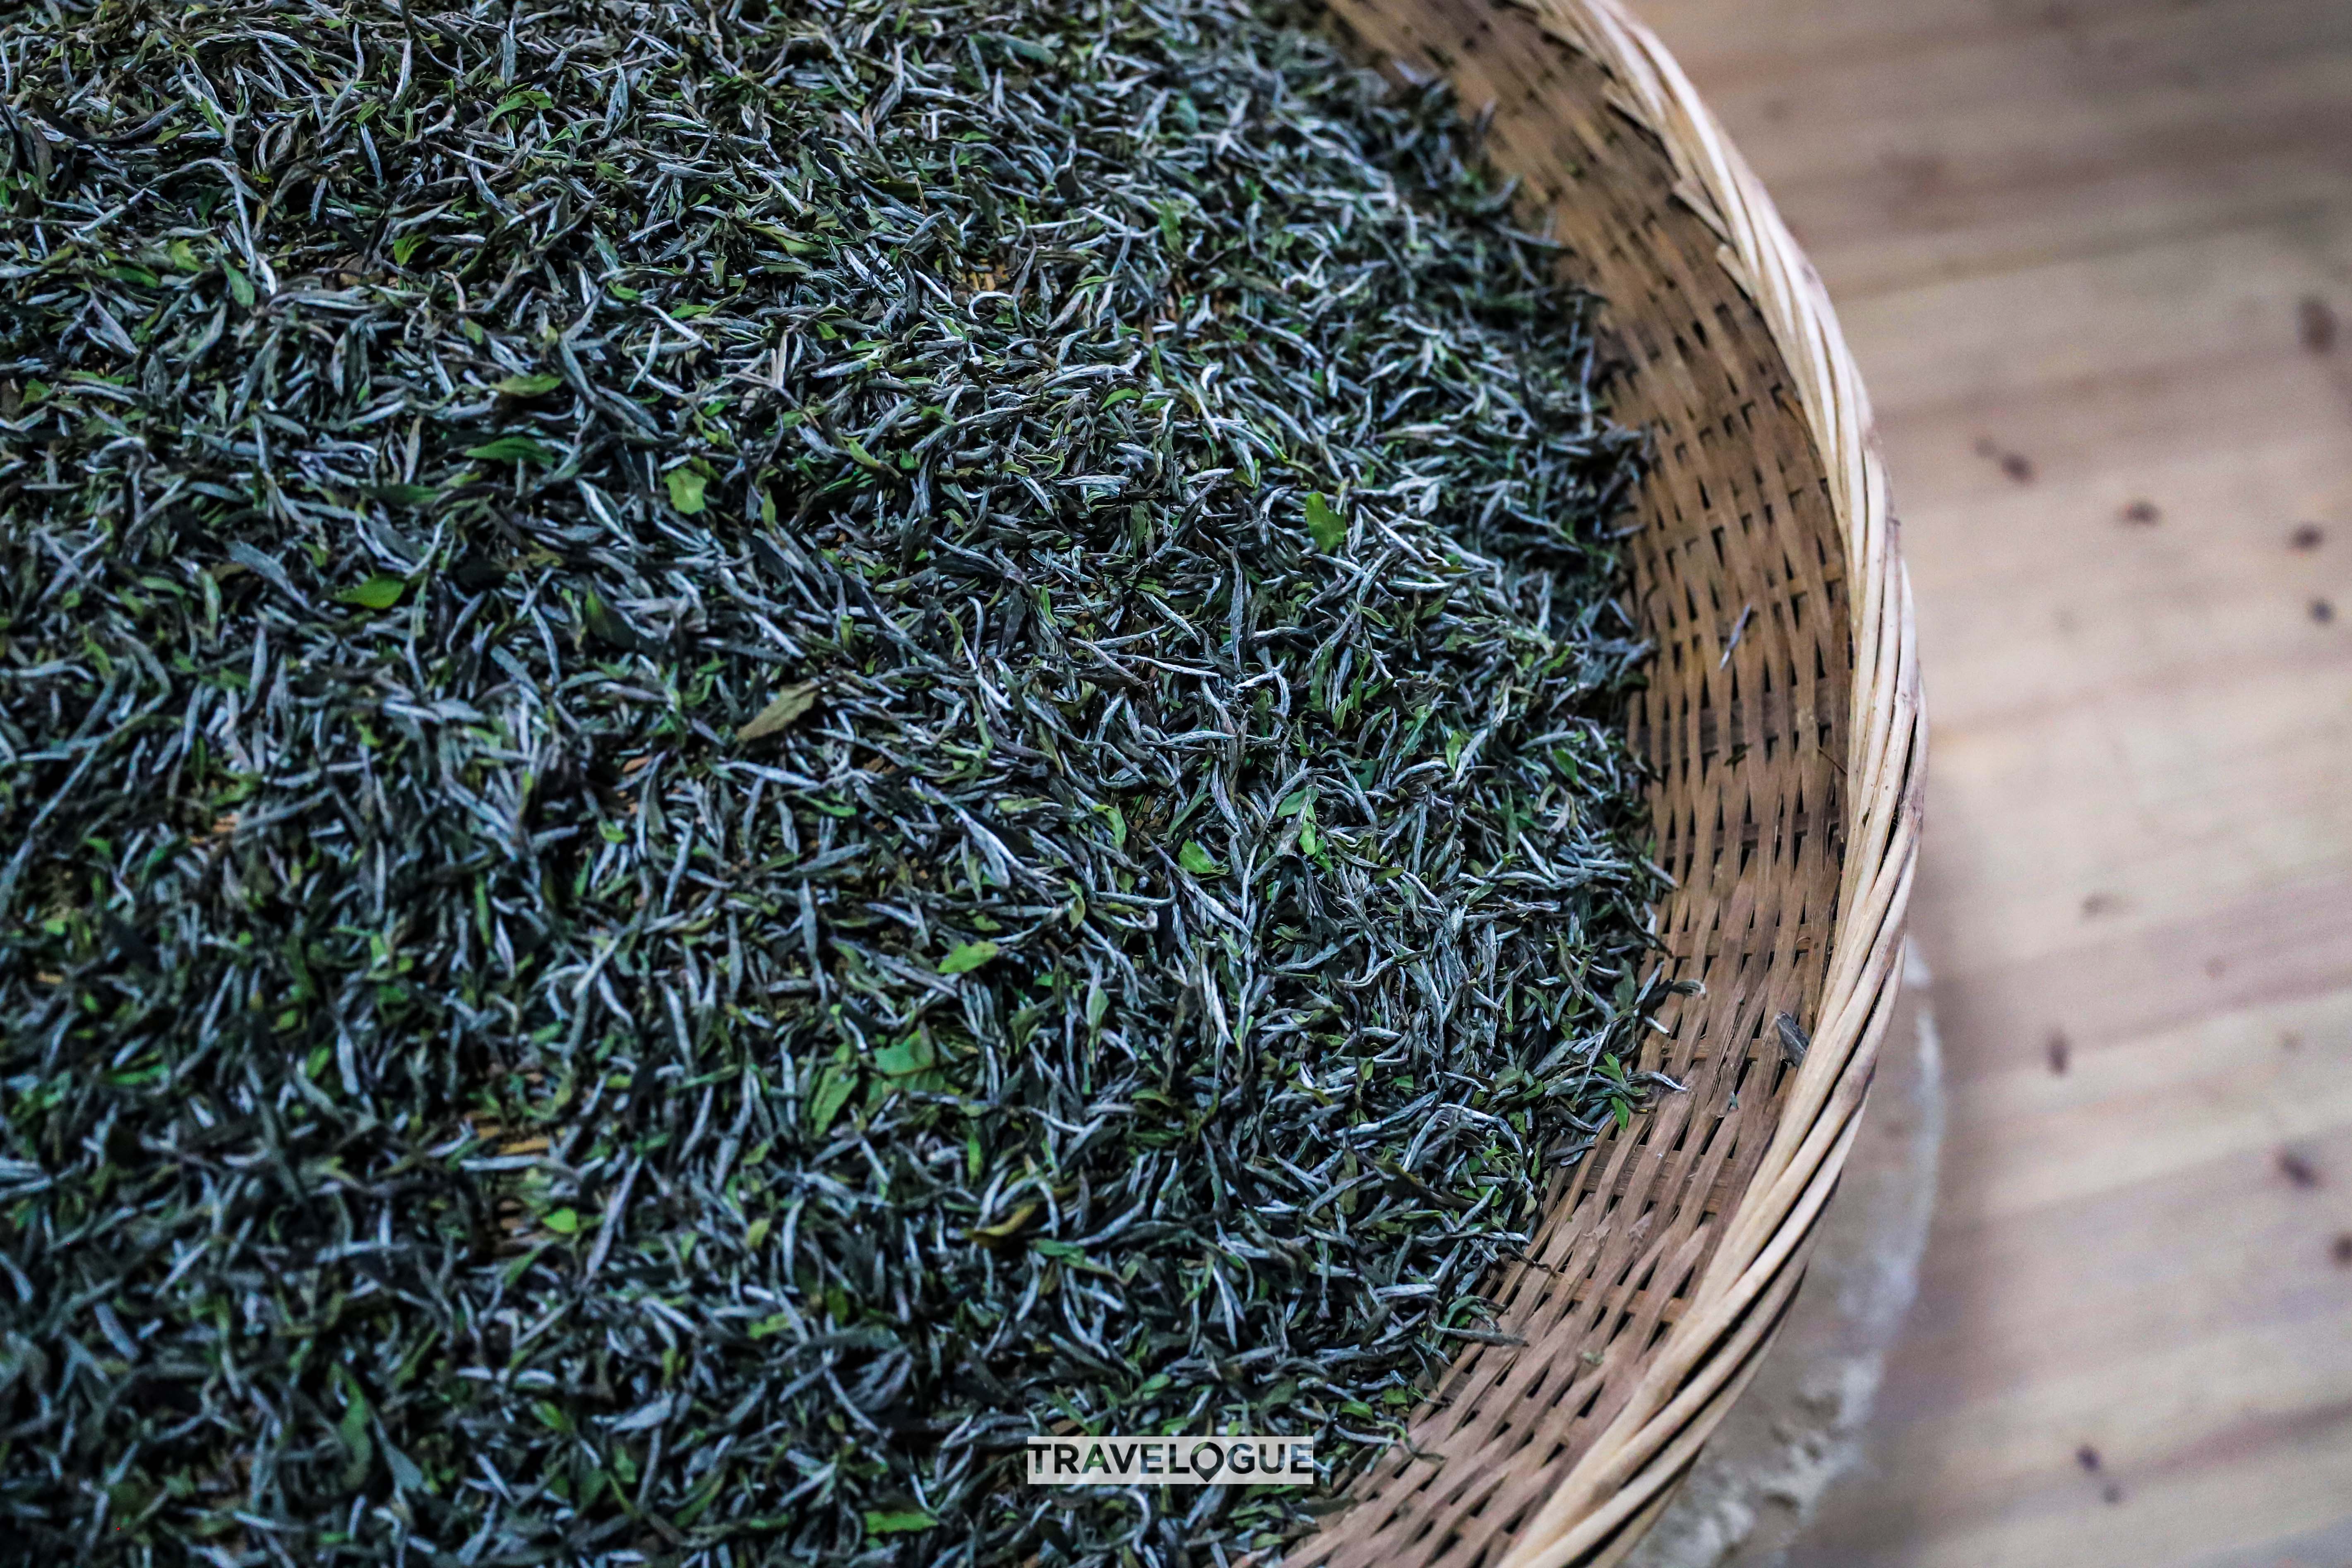 White tea leaves undergo the drying process in Fuding, Fujian Province. /CGTN